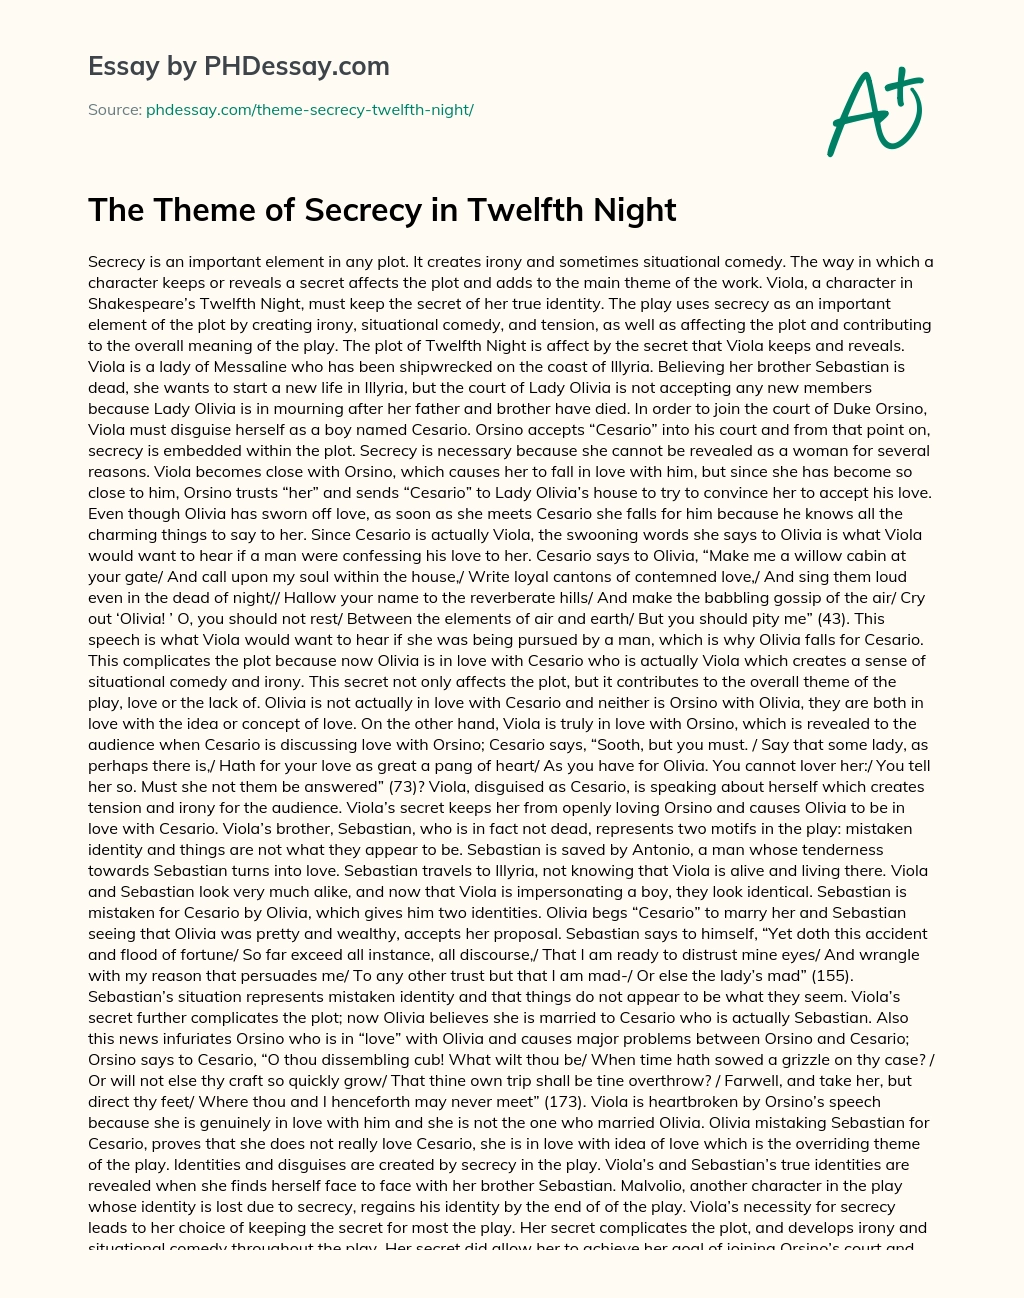 The Theme of Secrecy in Twelfth Night essay